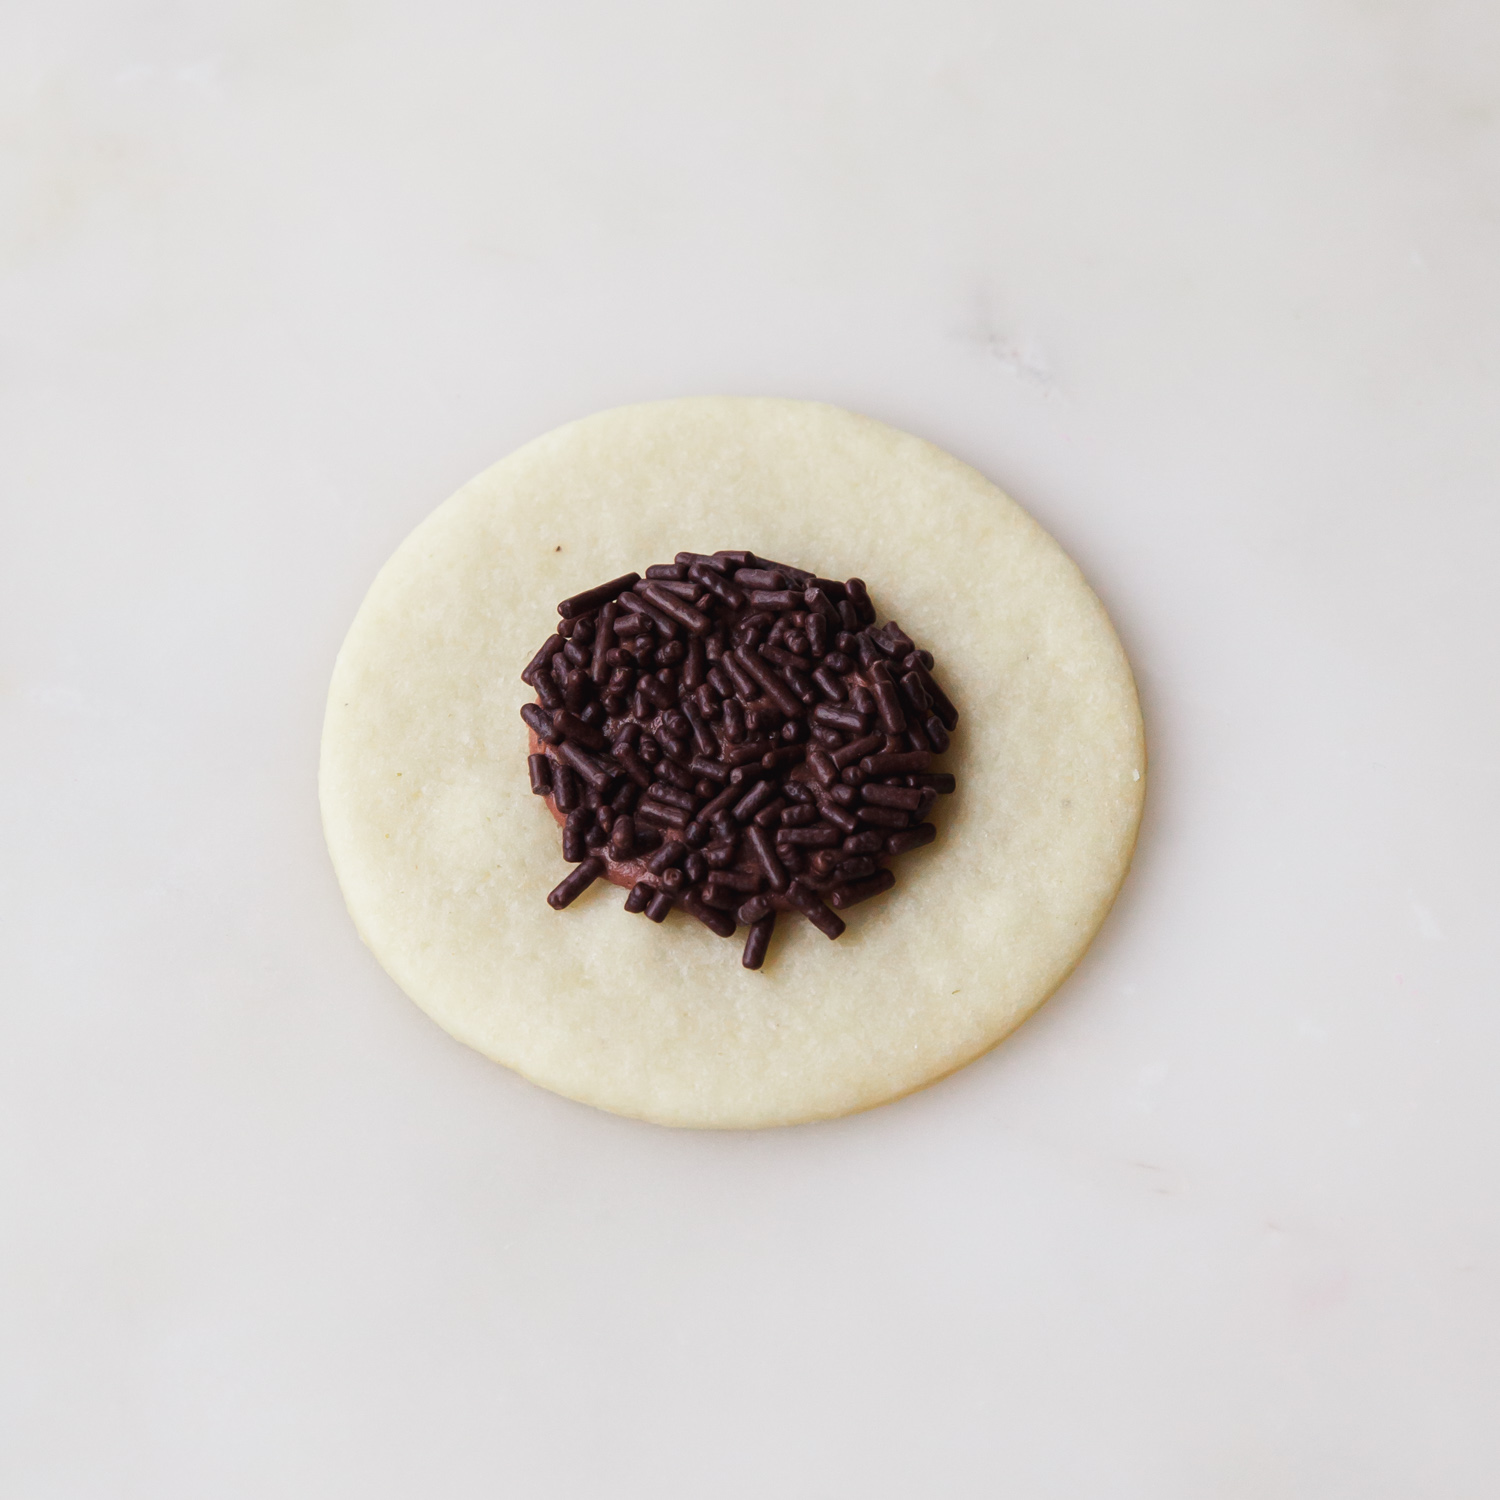 Flip the cookie upside down and dip in a shallow bowl of chocolate sprinkles.